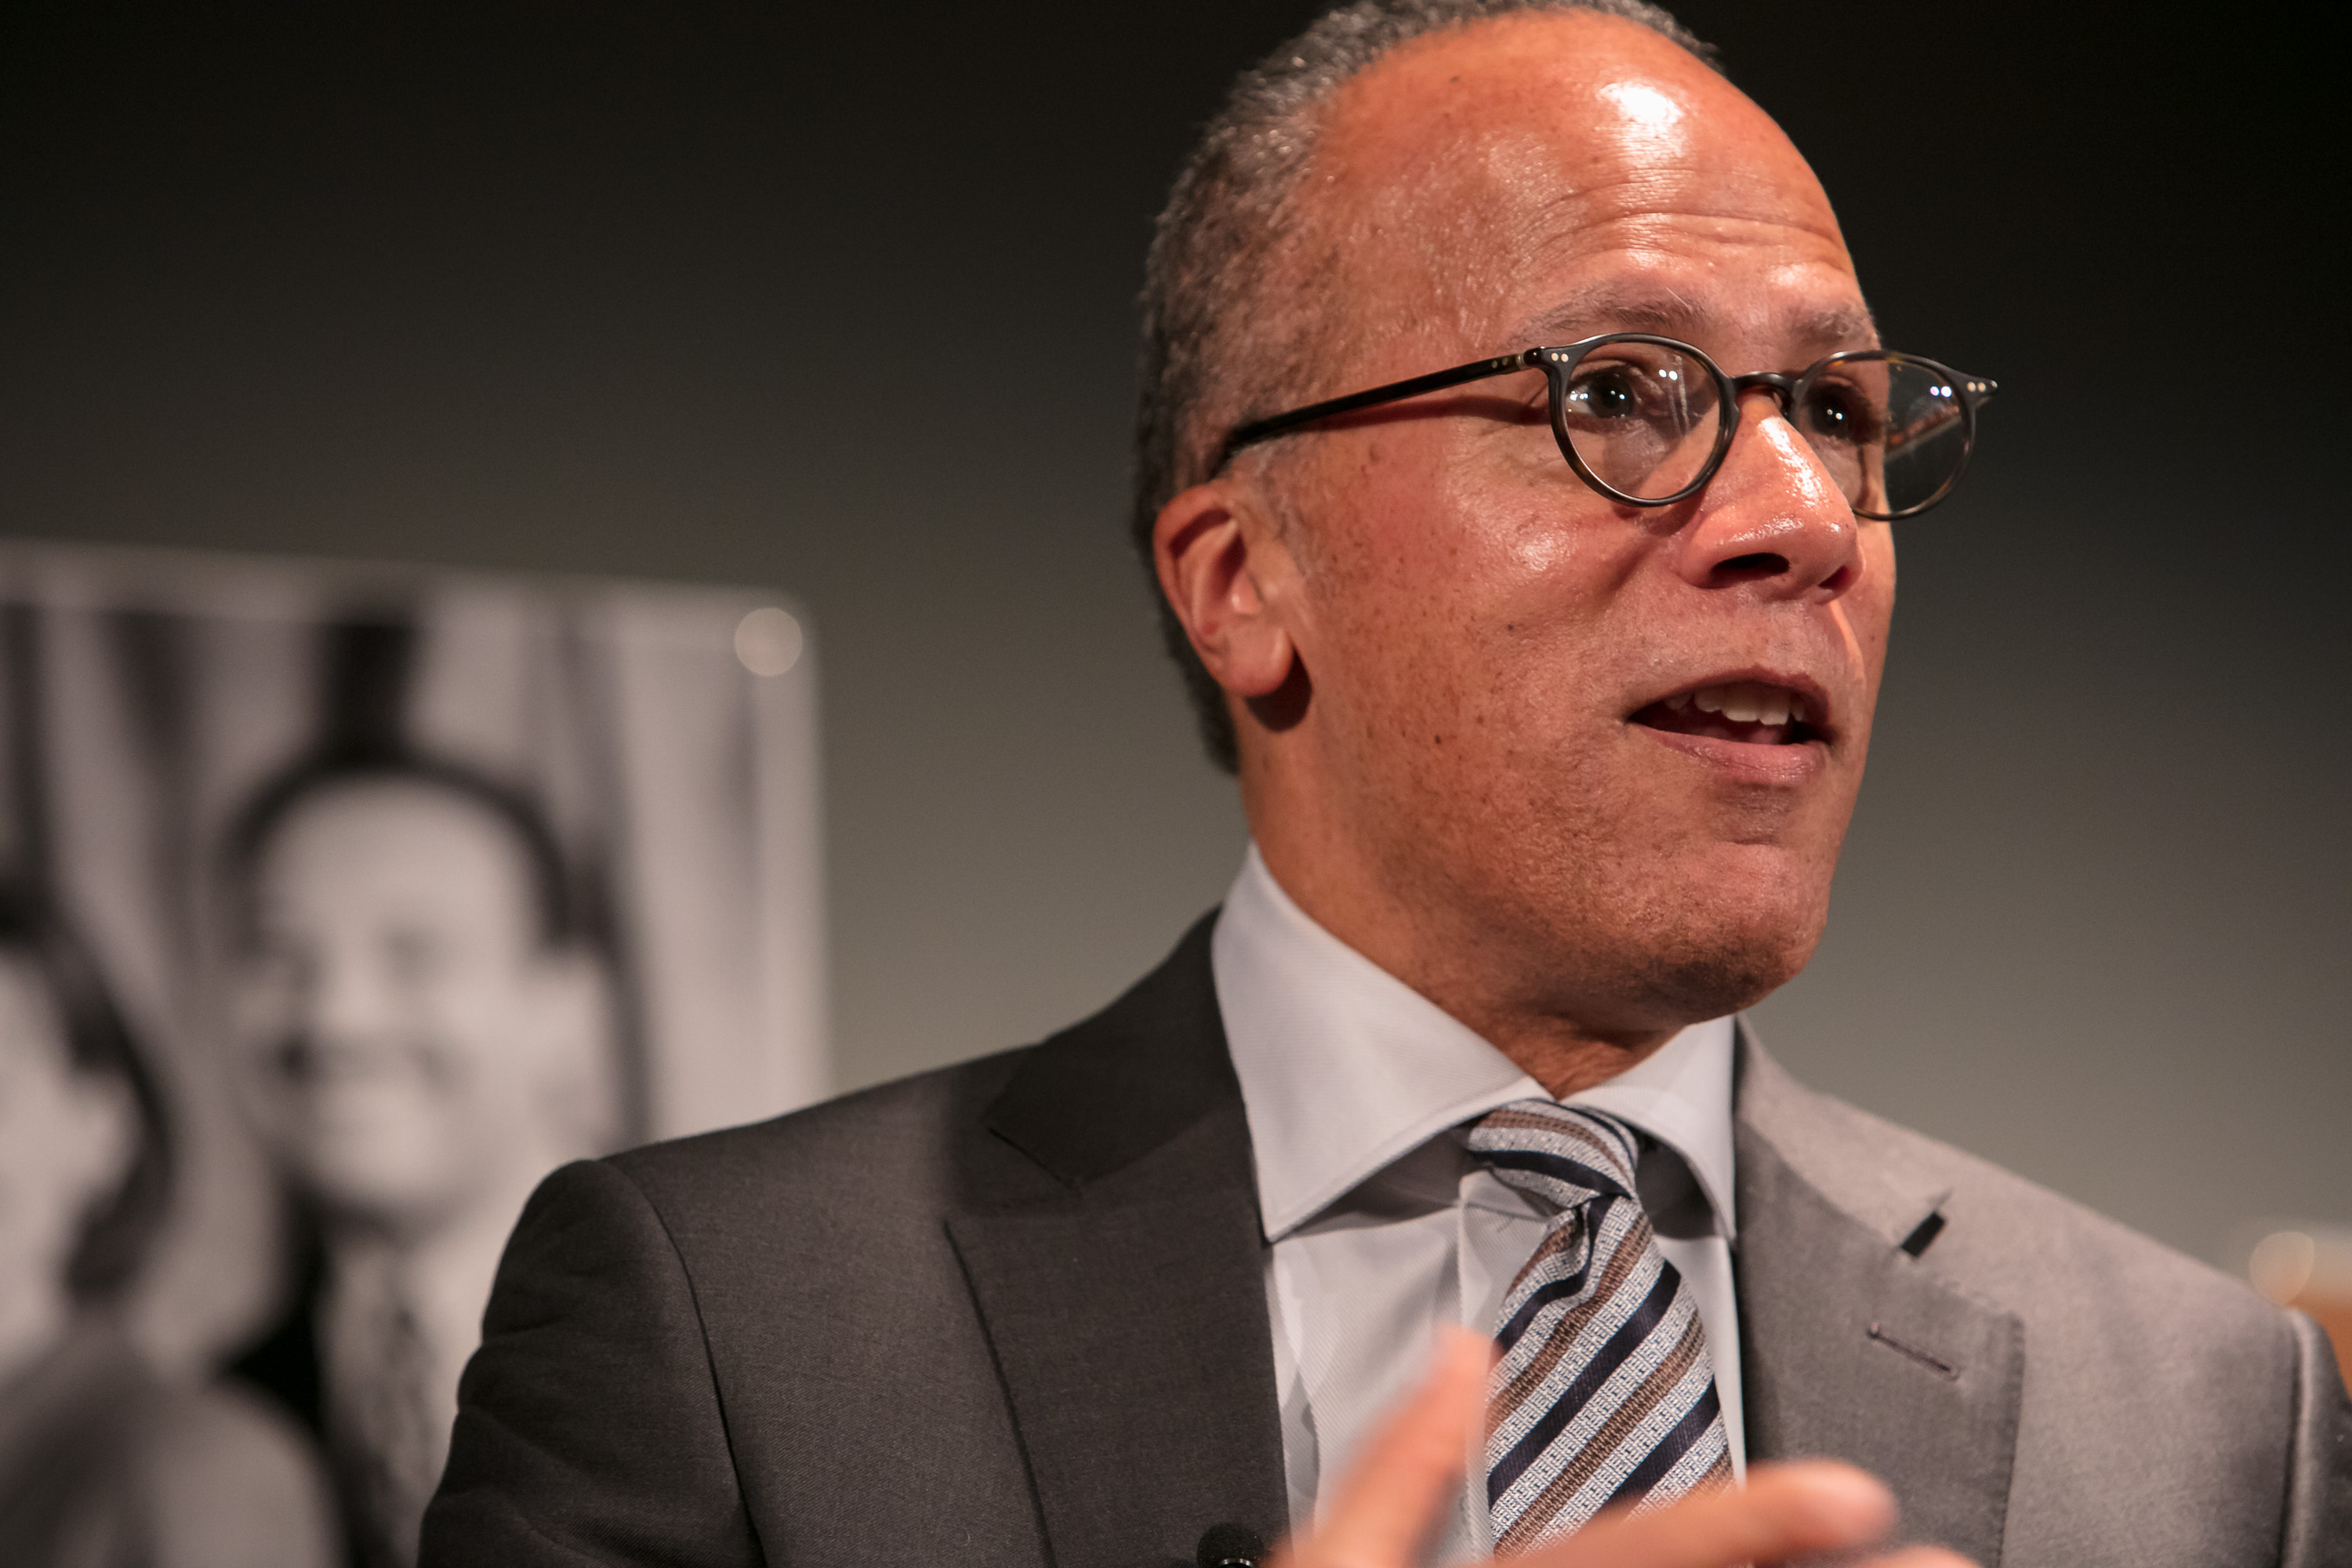 NBC Nightly News's Lester Holt